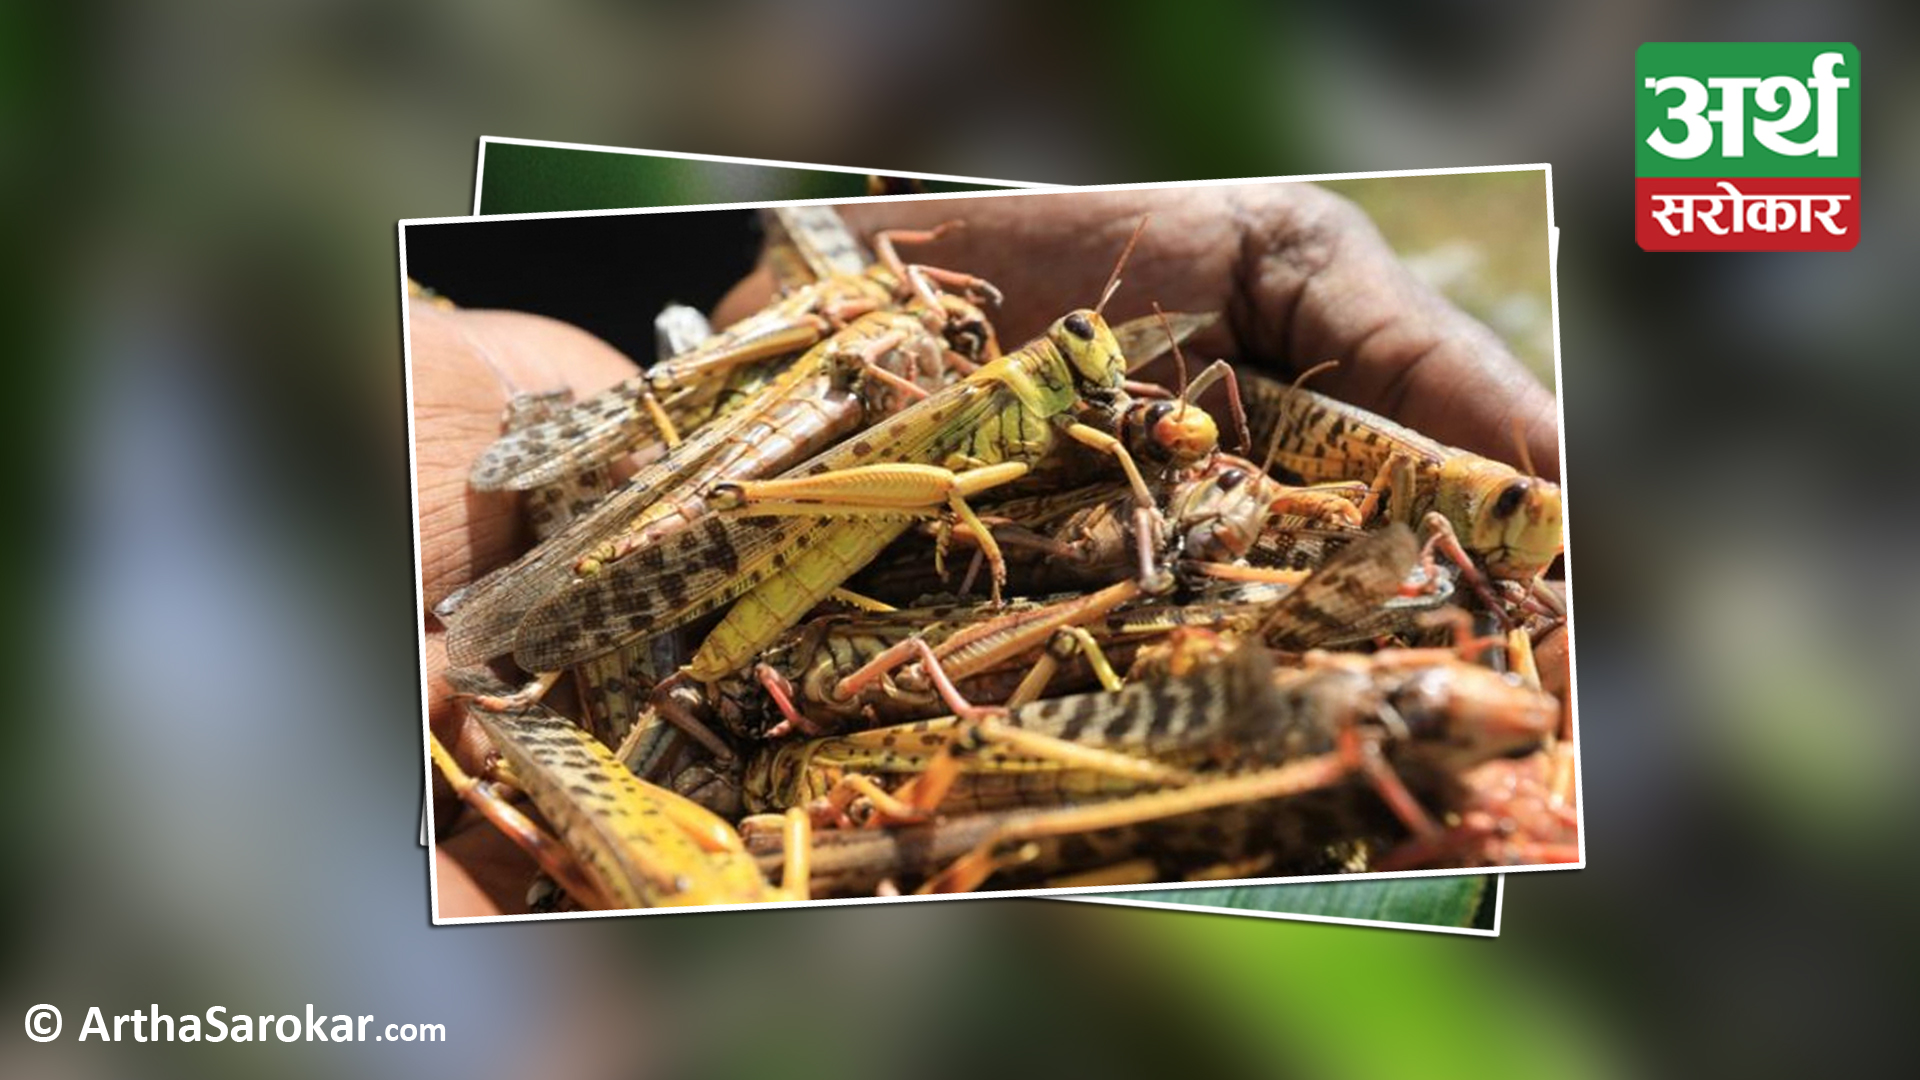 Tokha municipality to provide Rs 50 per kg of locusts as incentive